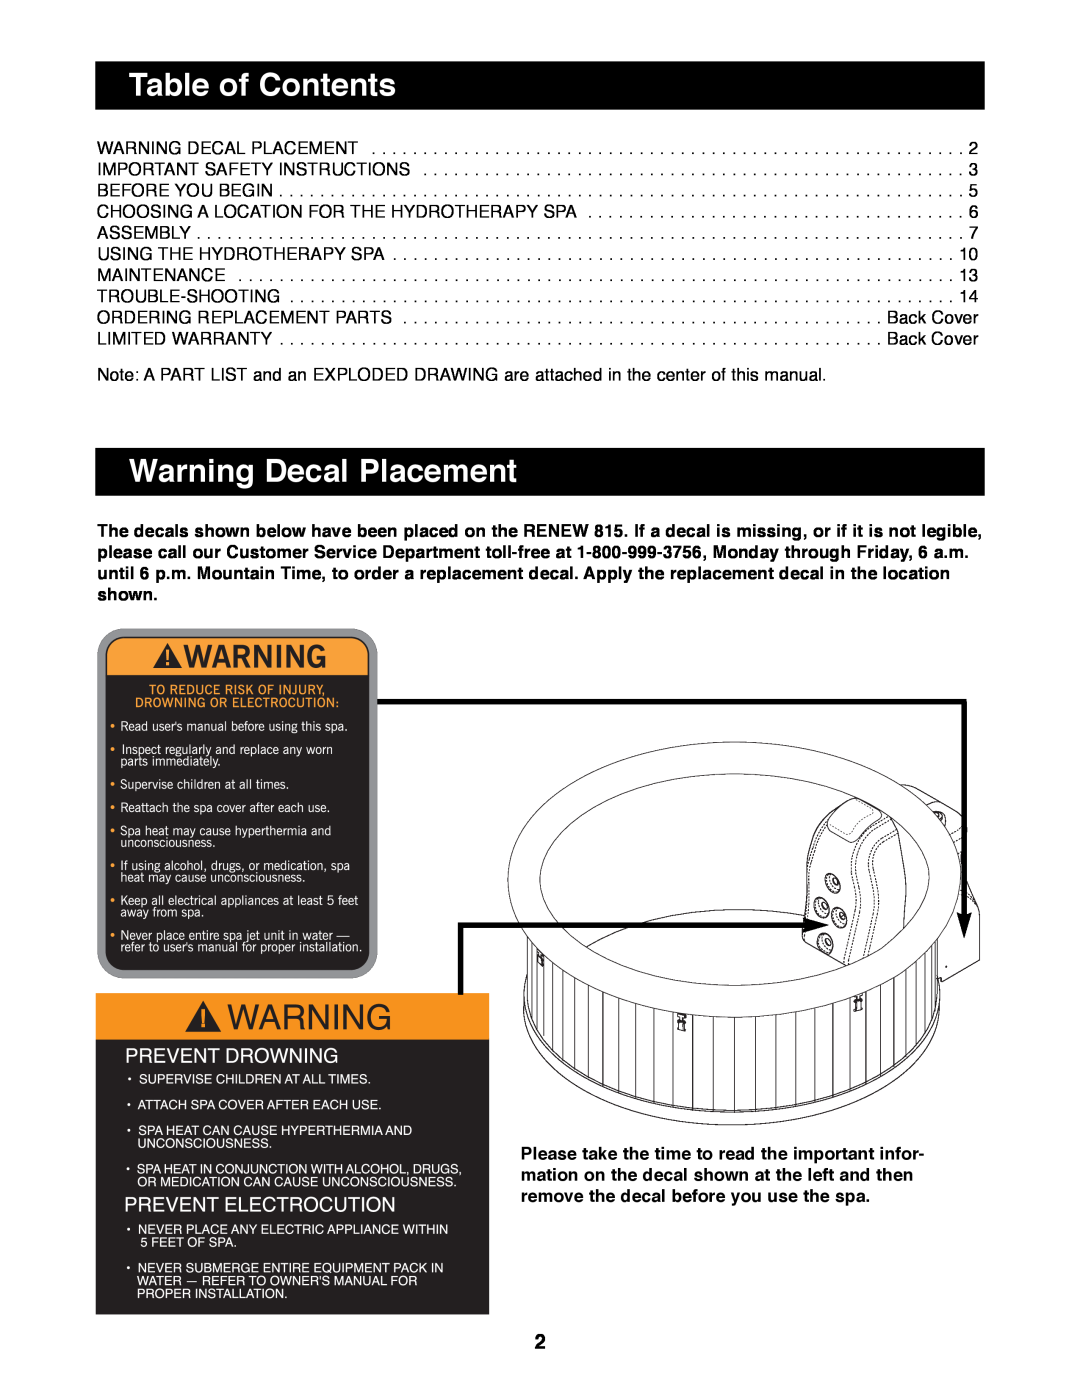 Image IMHS81590 manual Table of Contents, Warning Decal Placement 